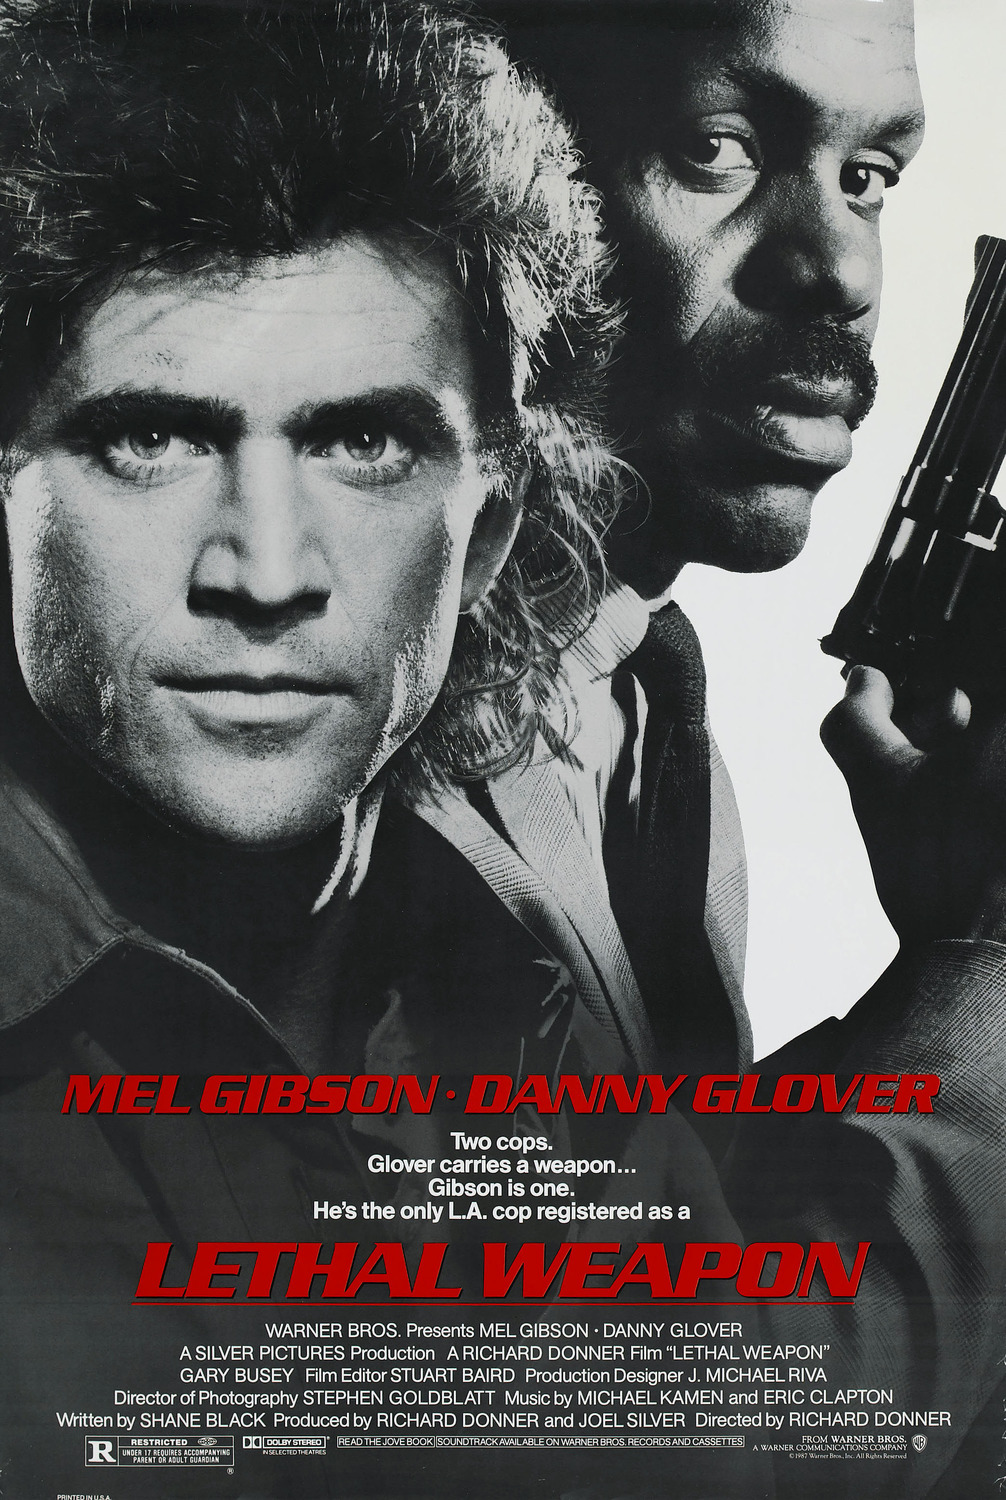 Extra Large Movie Poster Image for Lethal Weapon 